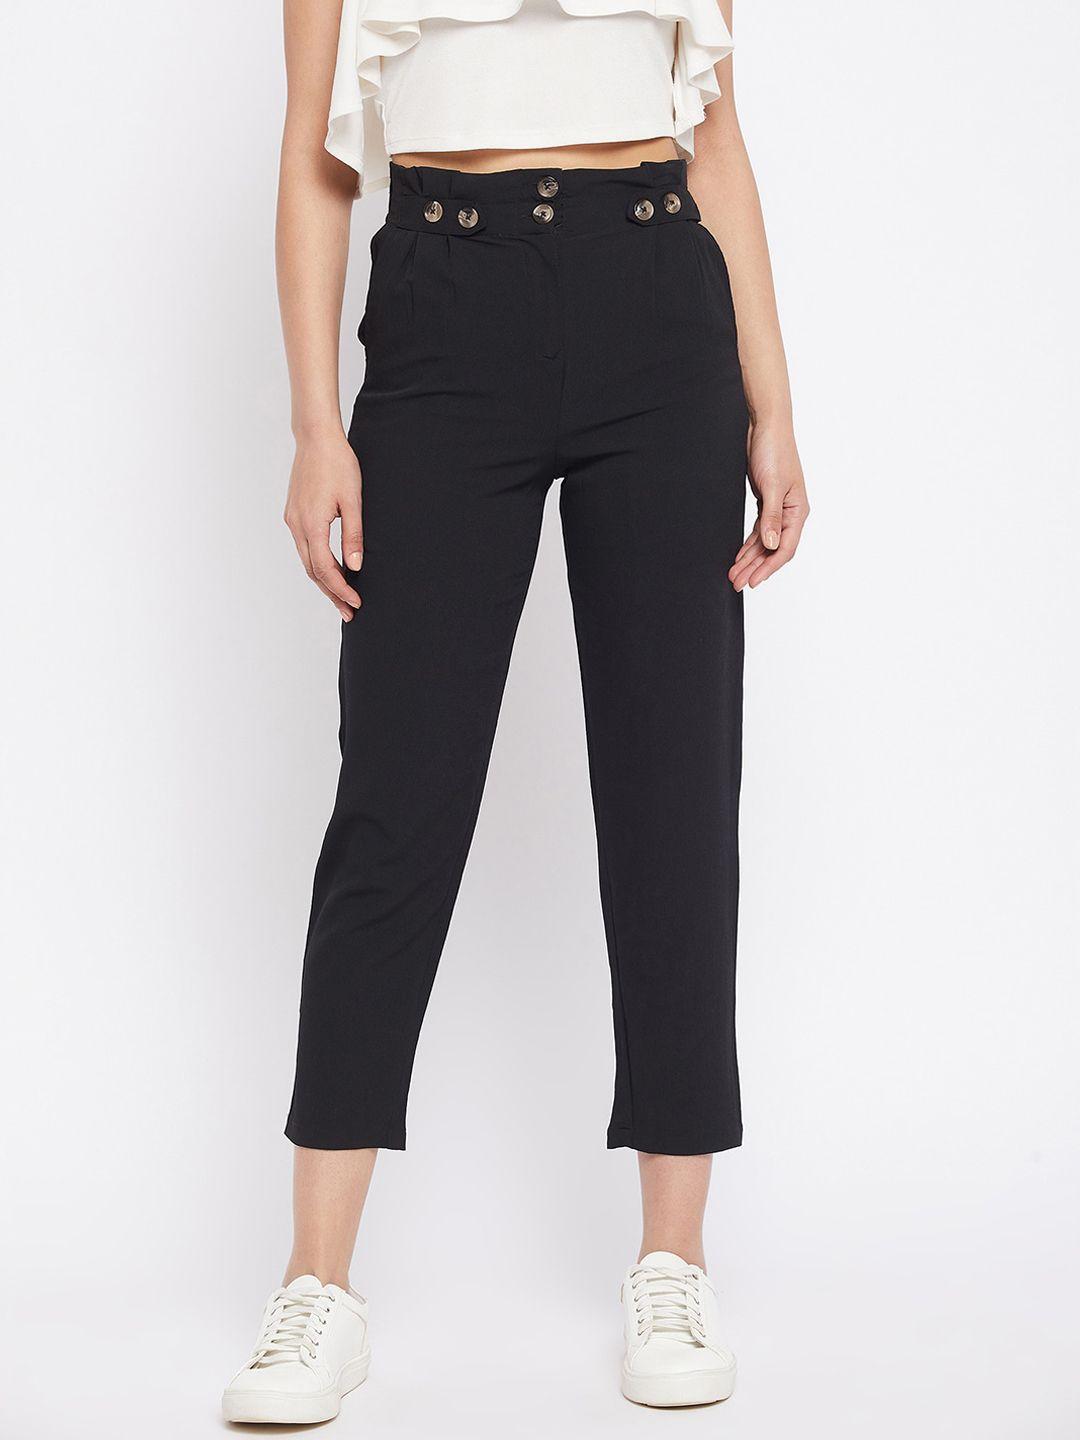 winered-women-black-high-rise-easy-wash-trousers